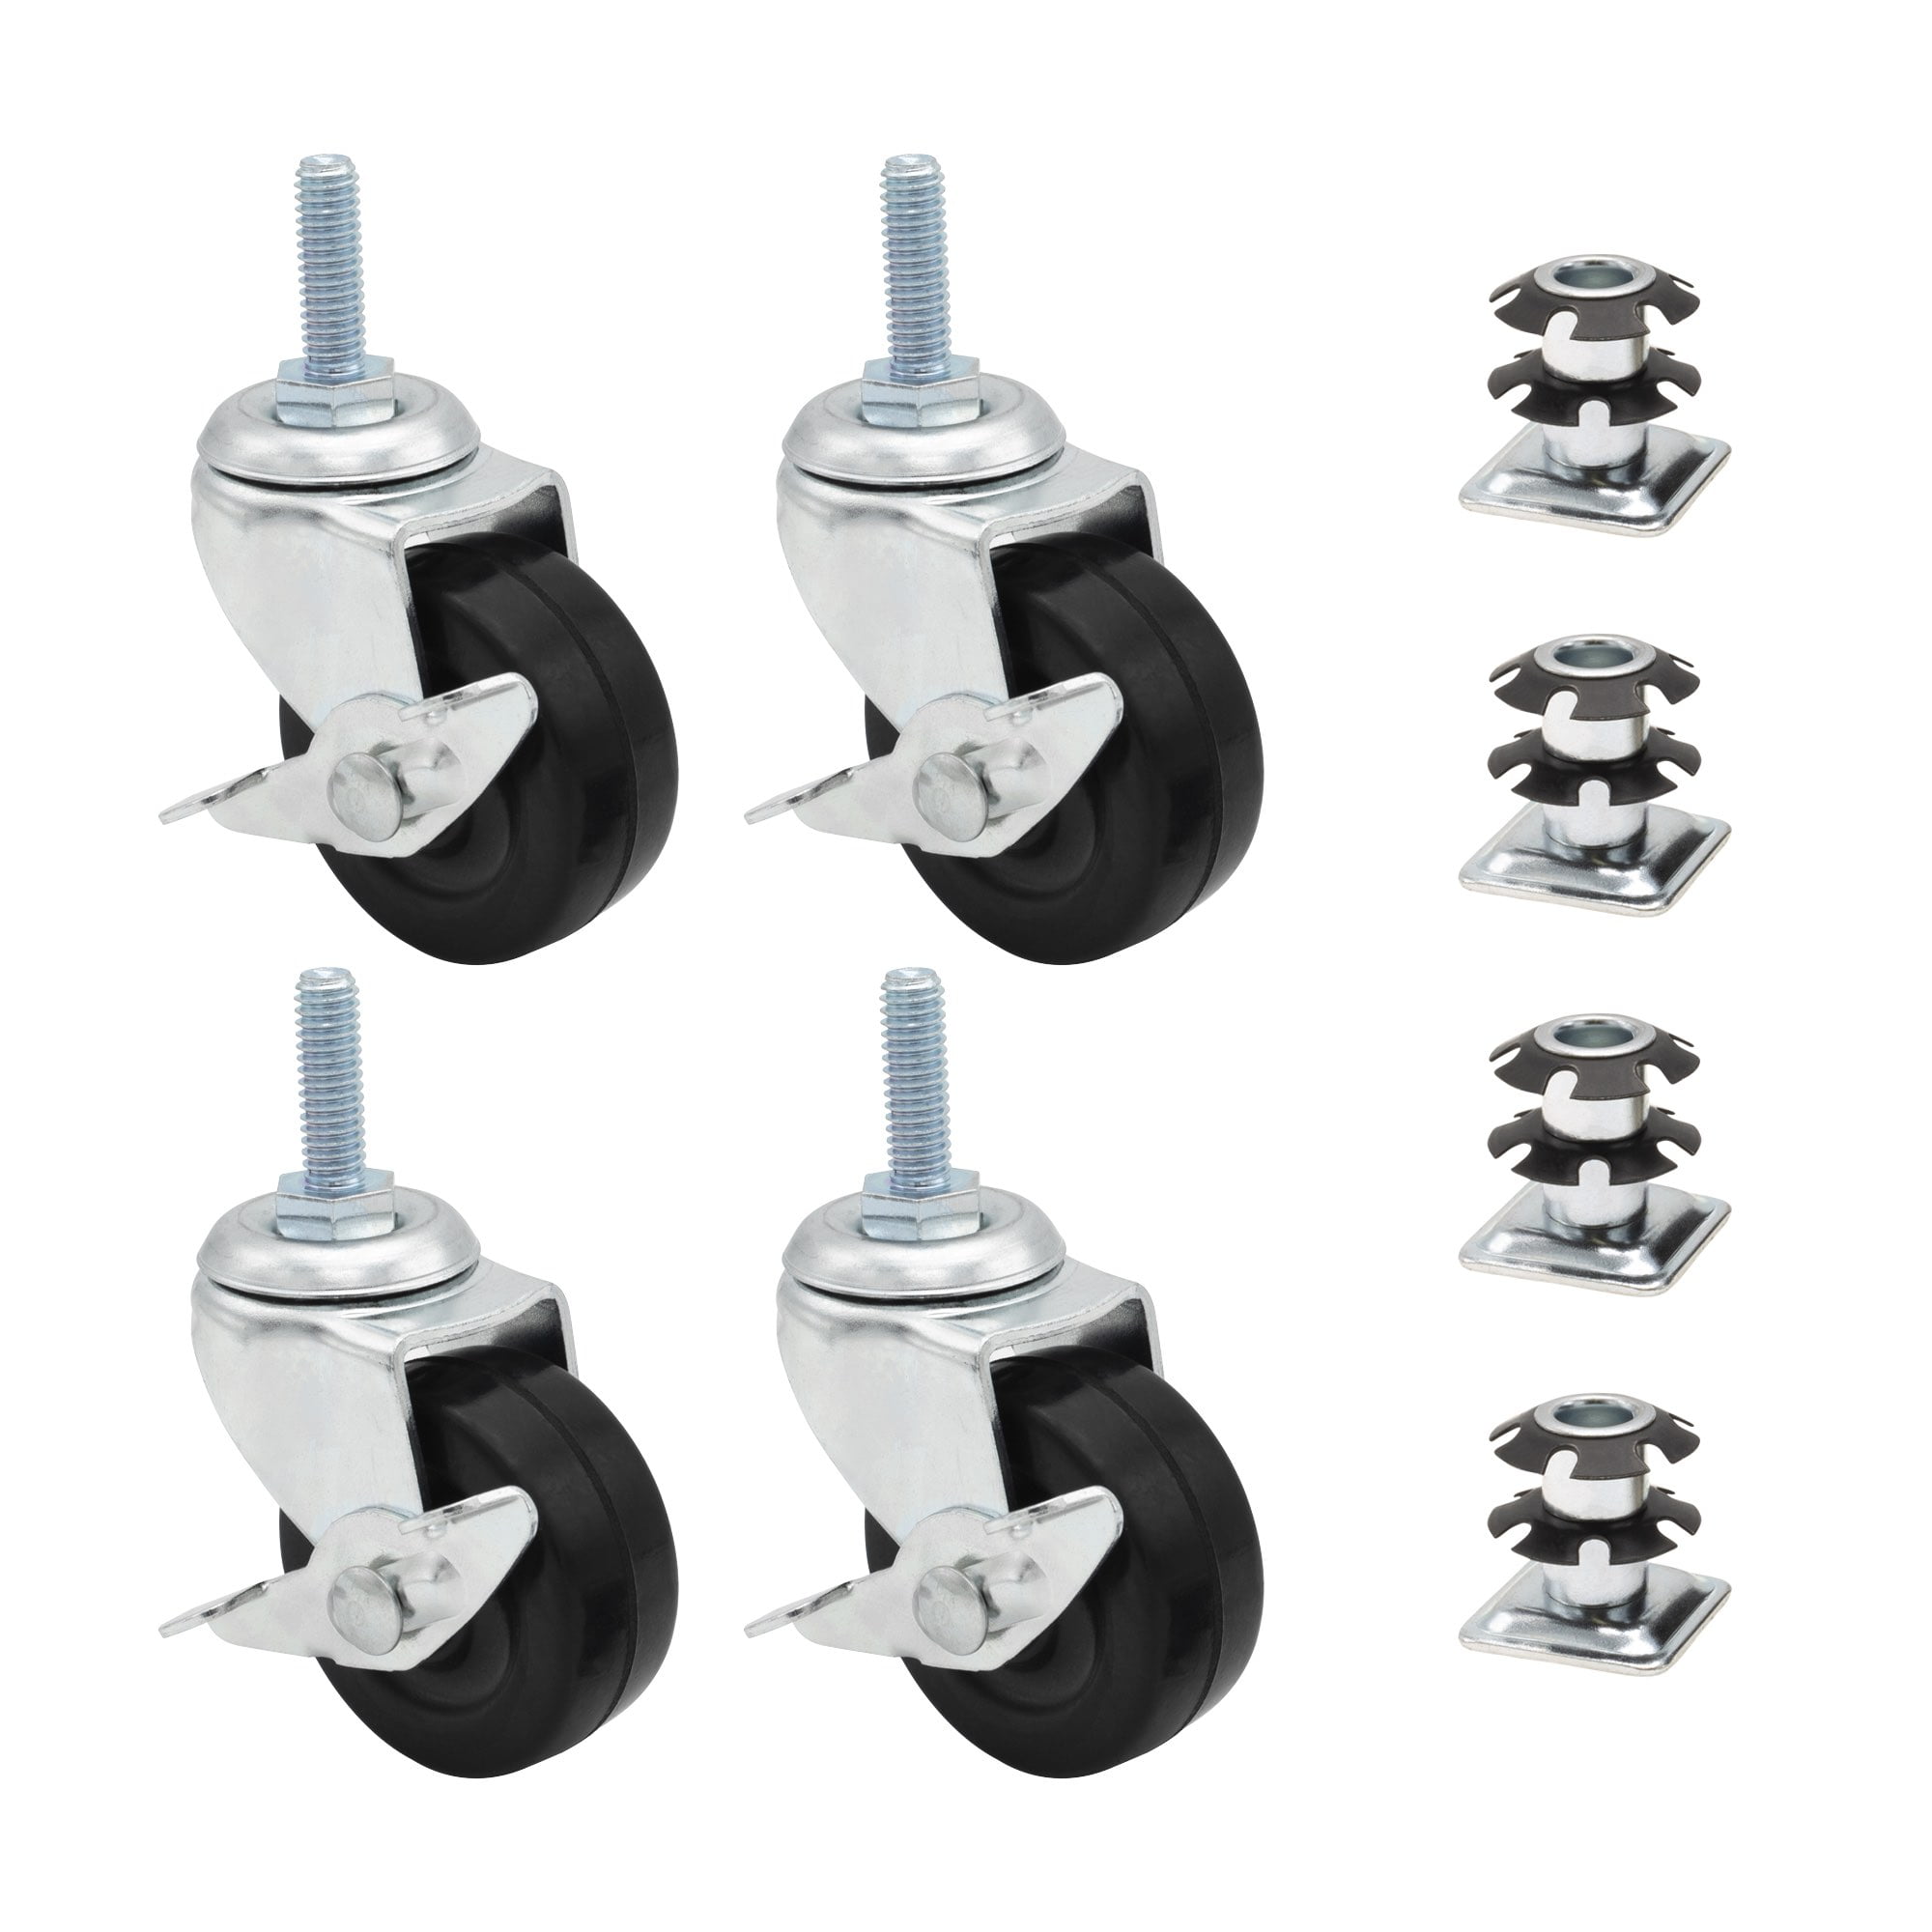 5/16-18 Threaded Stem 2 Wheel Diameter Industrial Casters 2 With Brakes and 2 Without Brakes by Outwater 1 Square Metal Double Star Caster Insert 